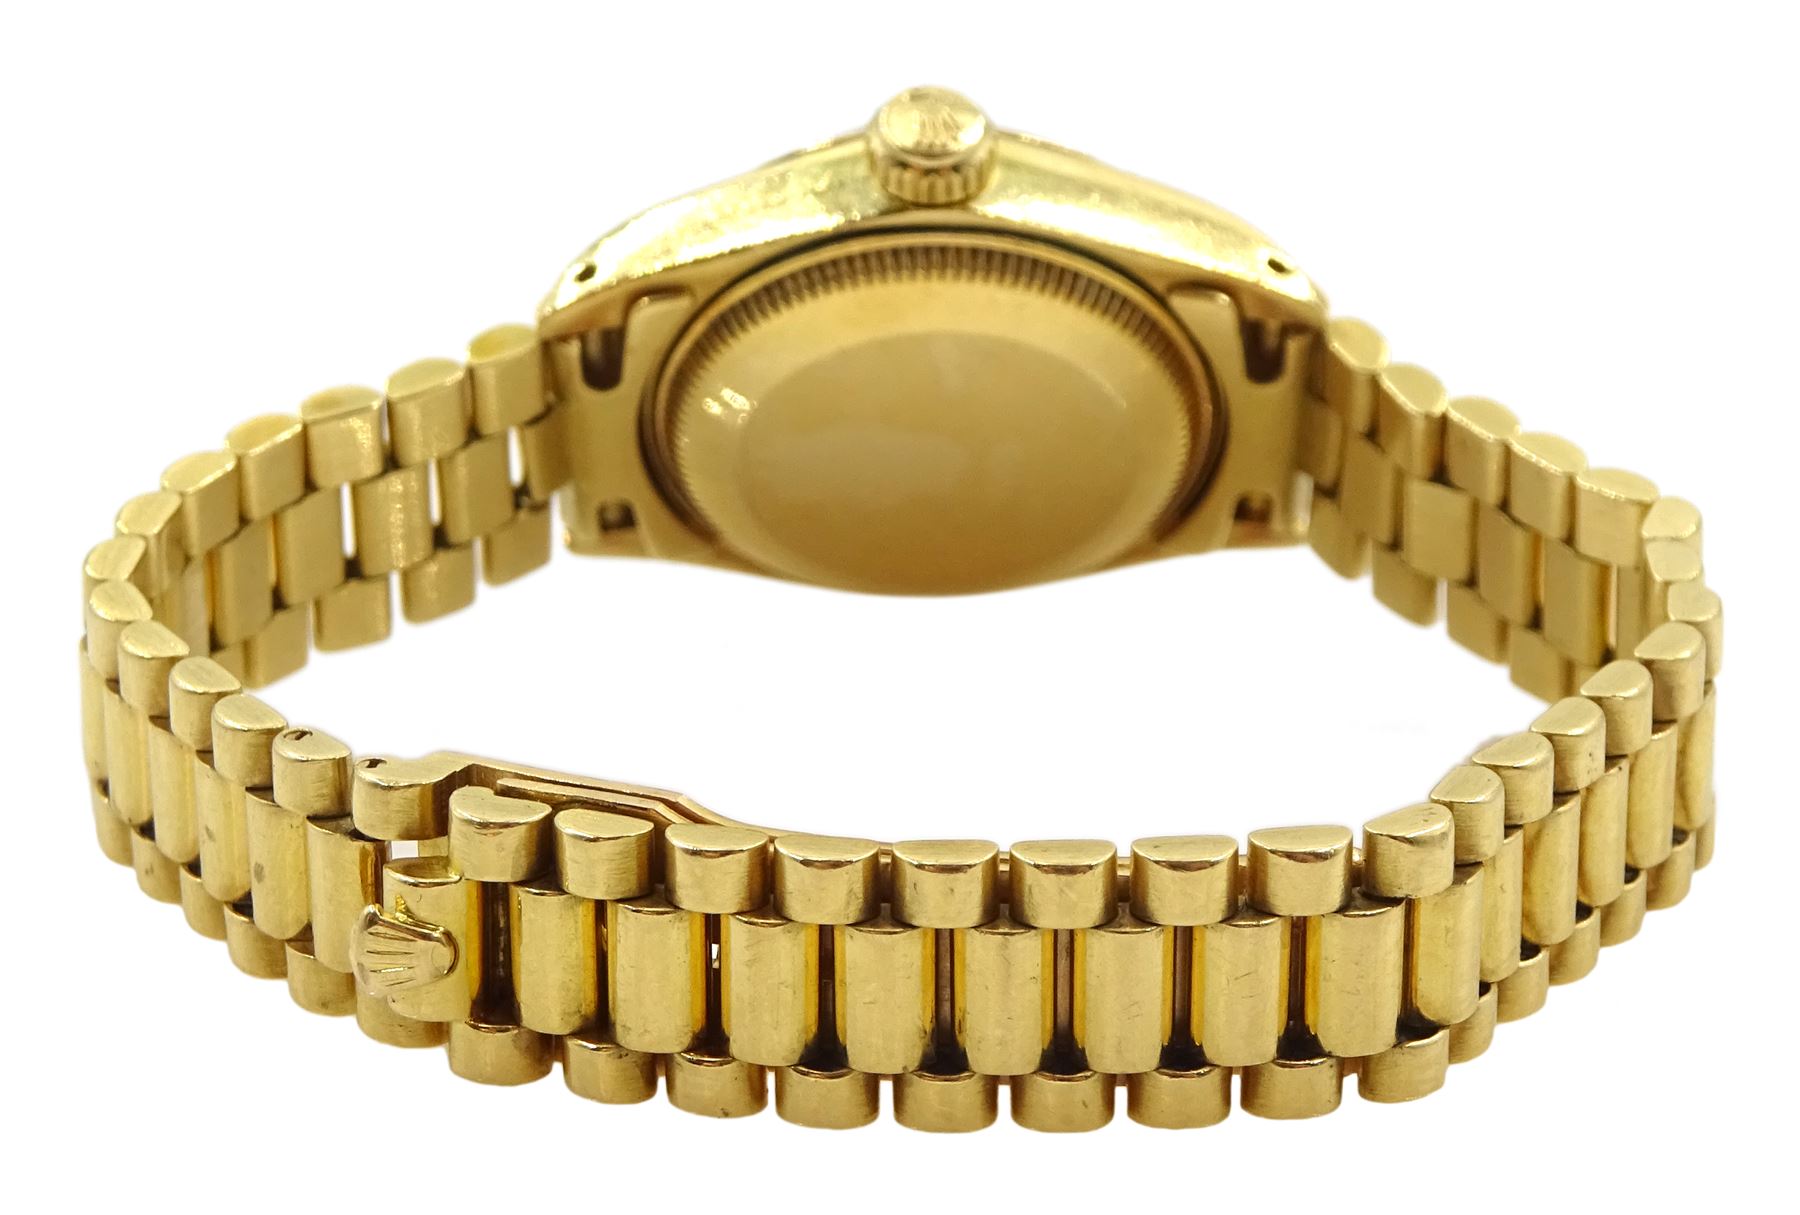 Rolex Oyster Perpetual Datejust ladies automatic 18ct gold jubilee bracelet wristwatch - Image 2 of 3